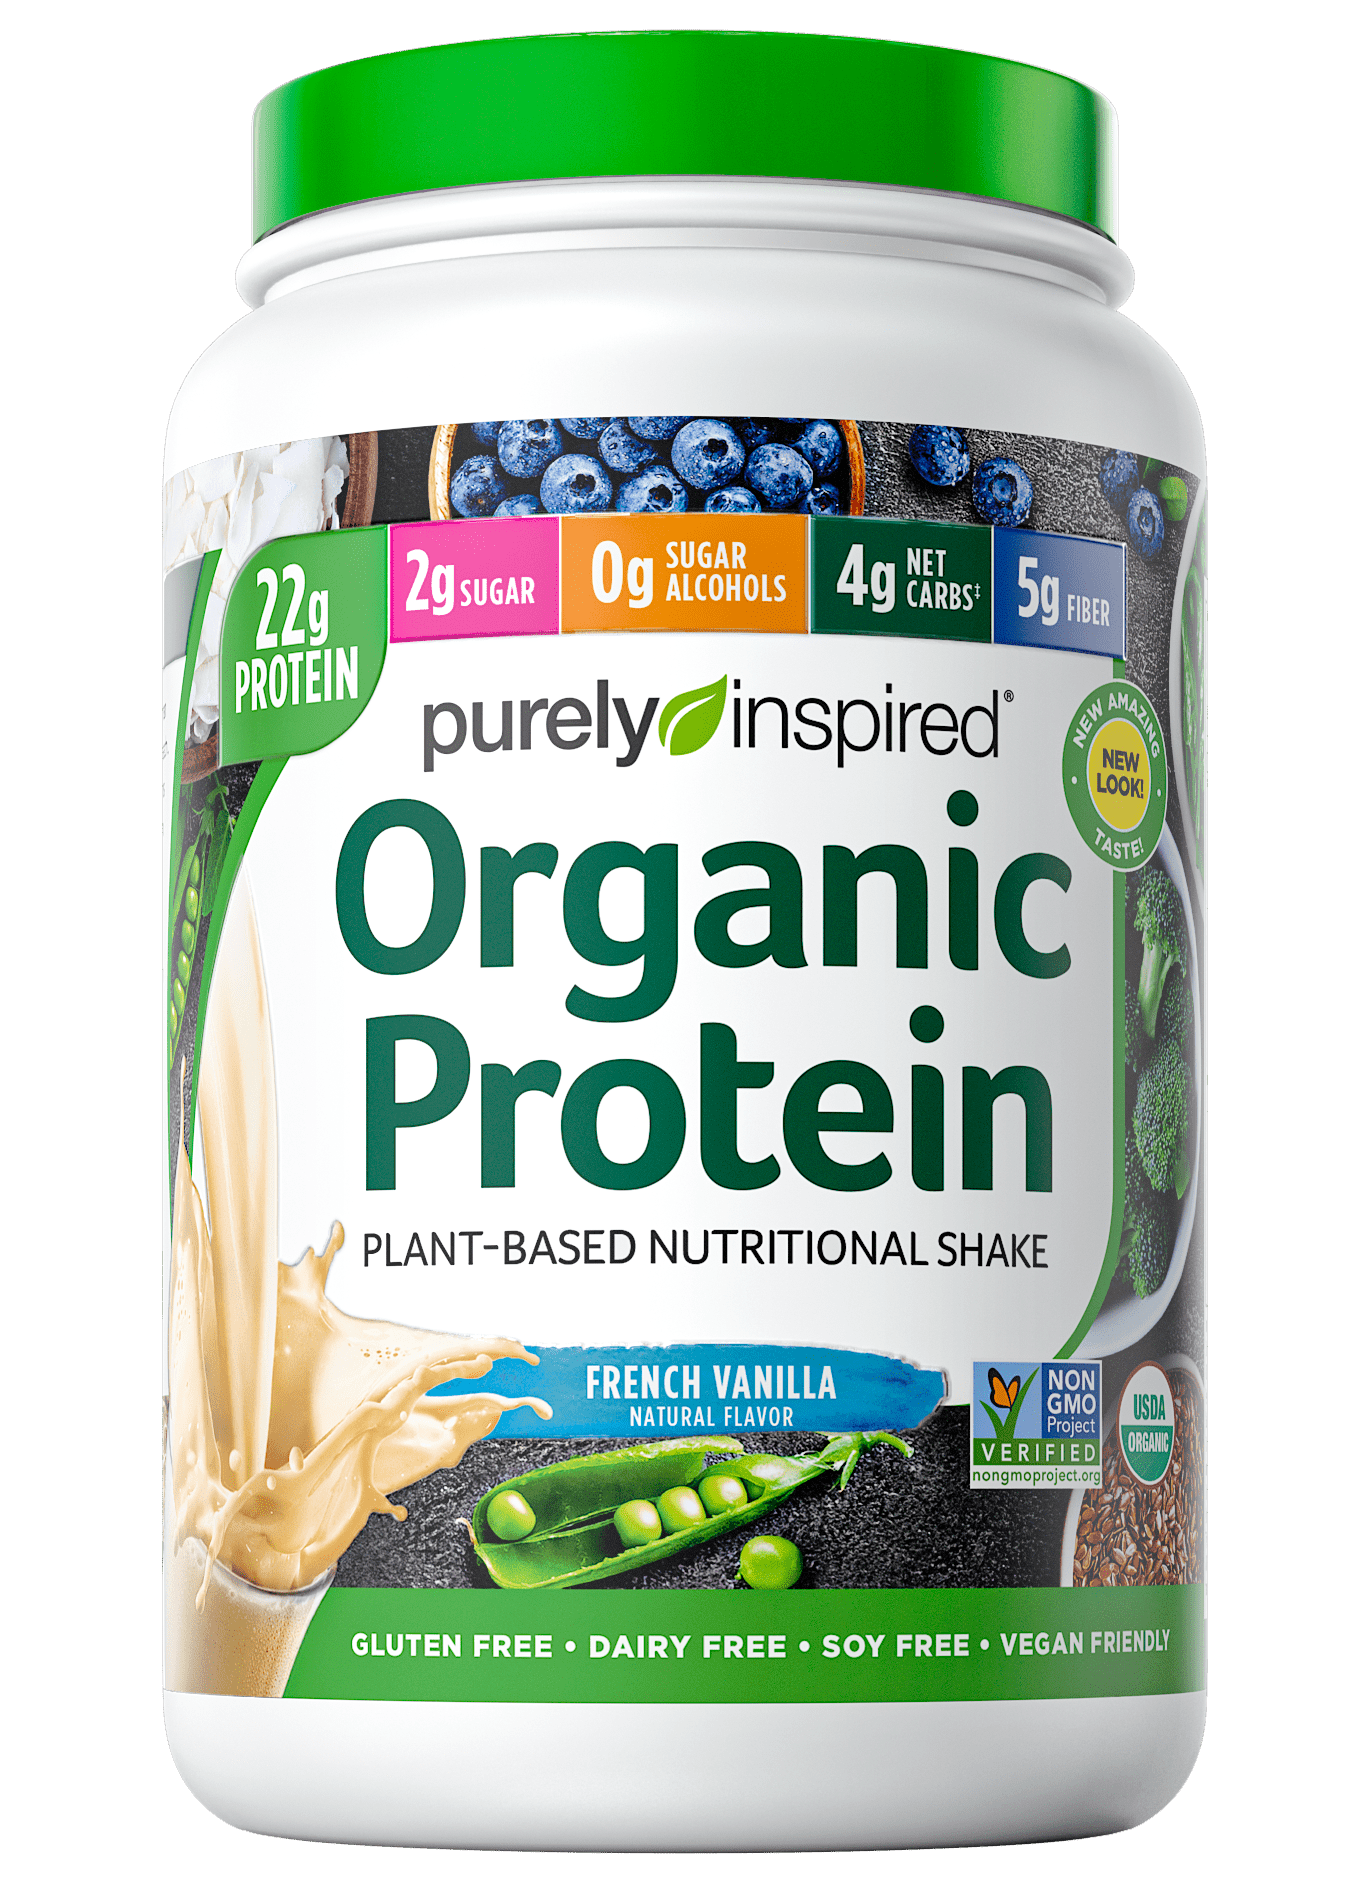 Purely Inspired Organic Plant Protein Powder, French Vanilla, 22g Protein, 1.5lb